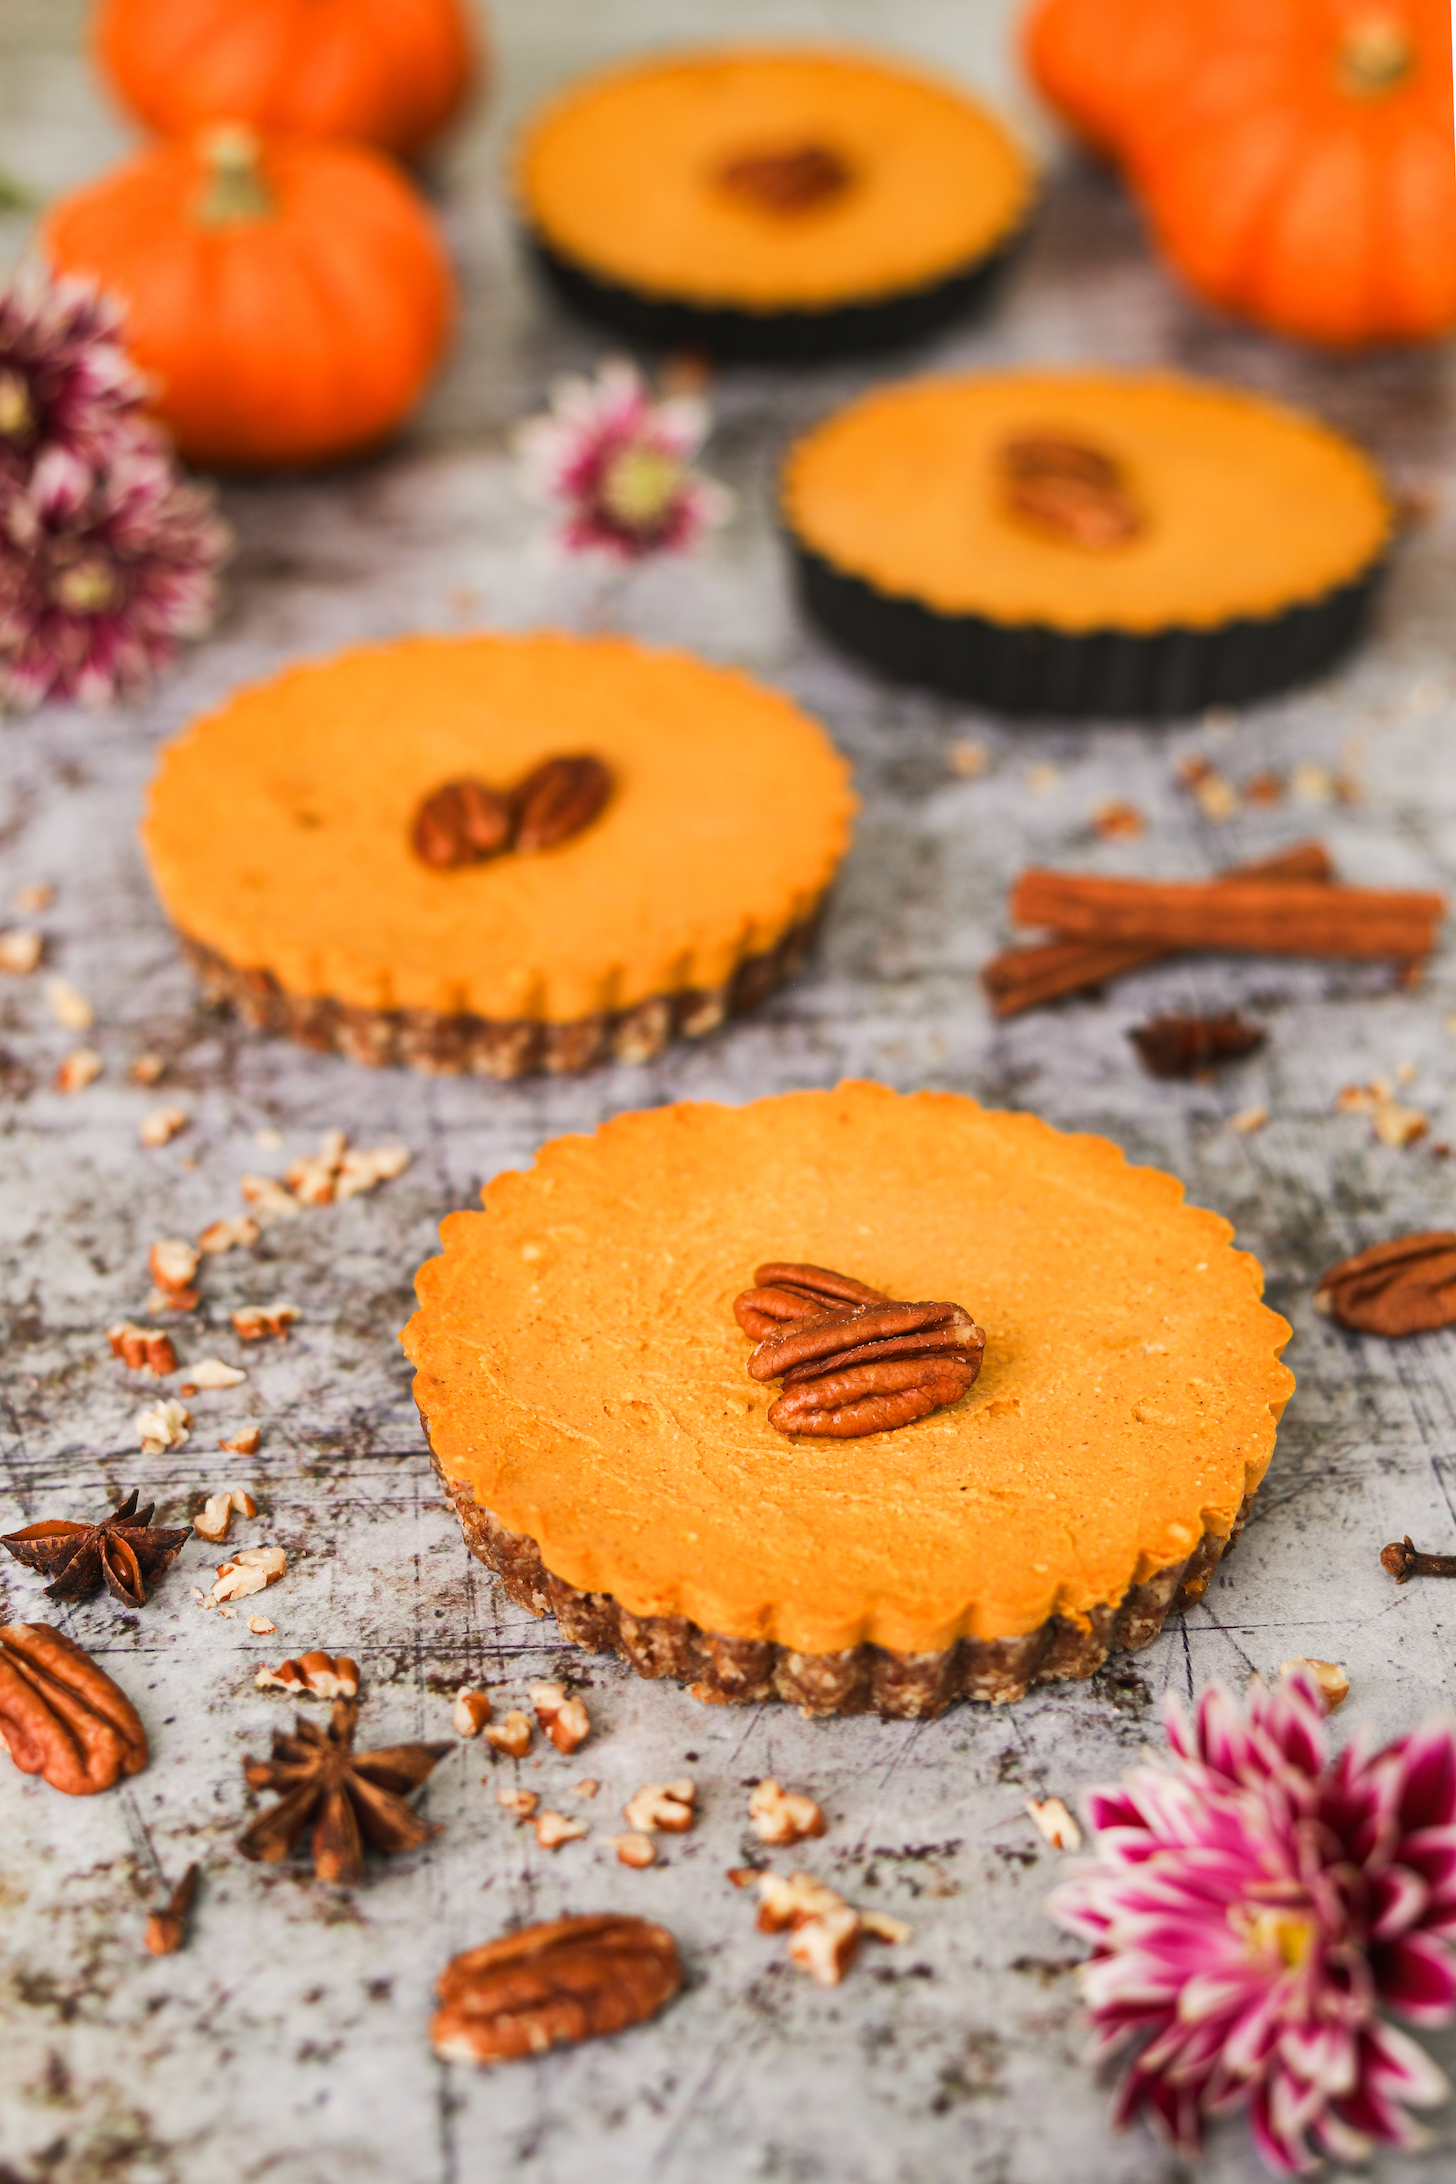 Perspective view of four mini pumpkin pies, each crowned with pecans, artfully arranged amidst flowers, nuts, spices, and whole mini pumpkins.